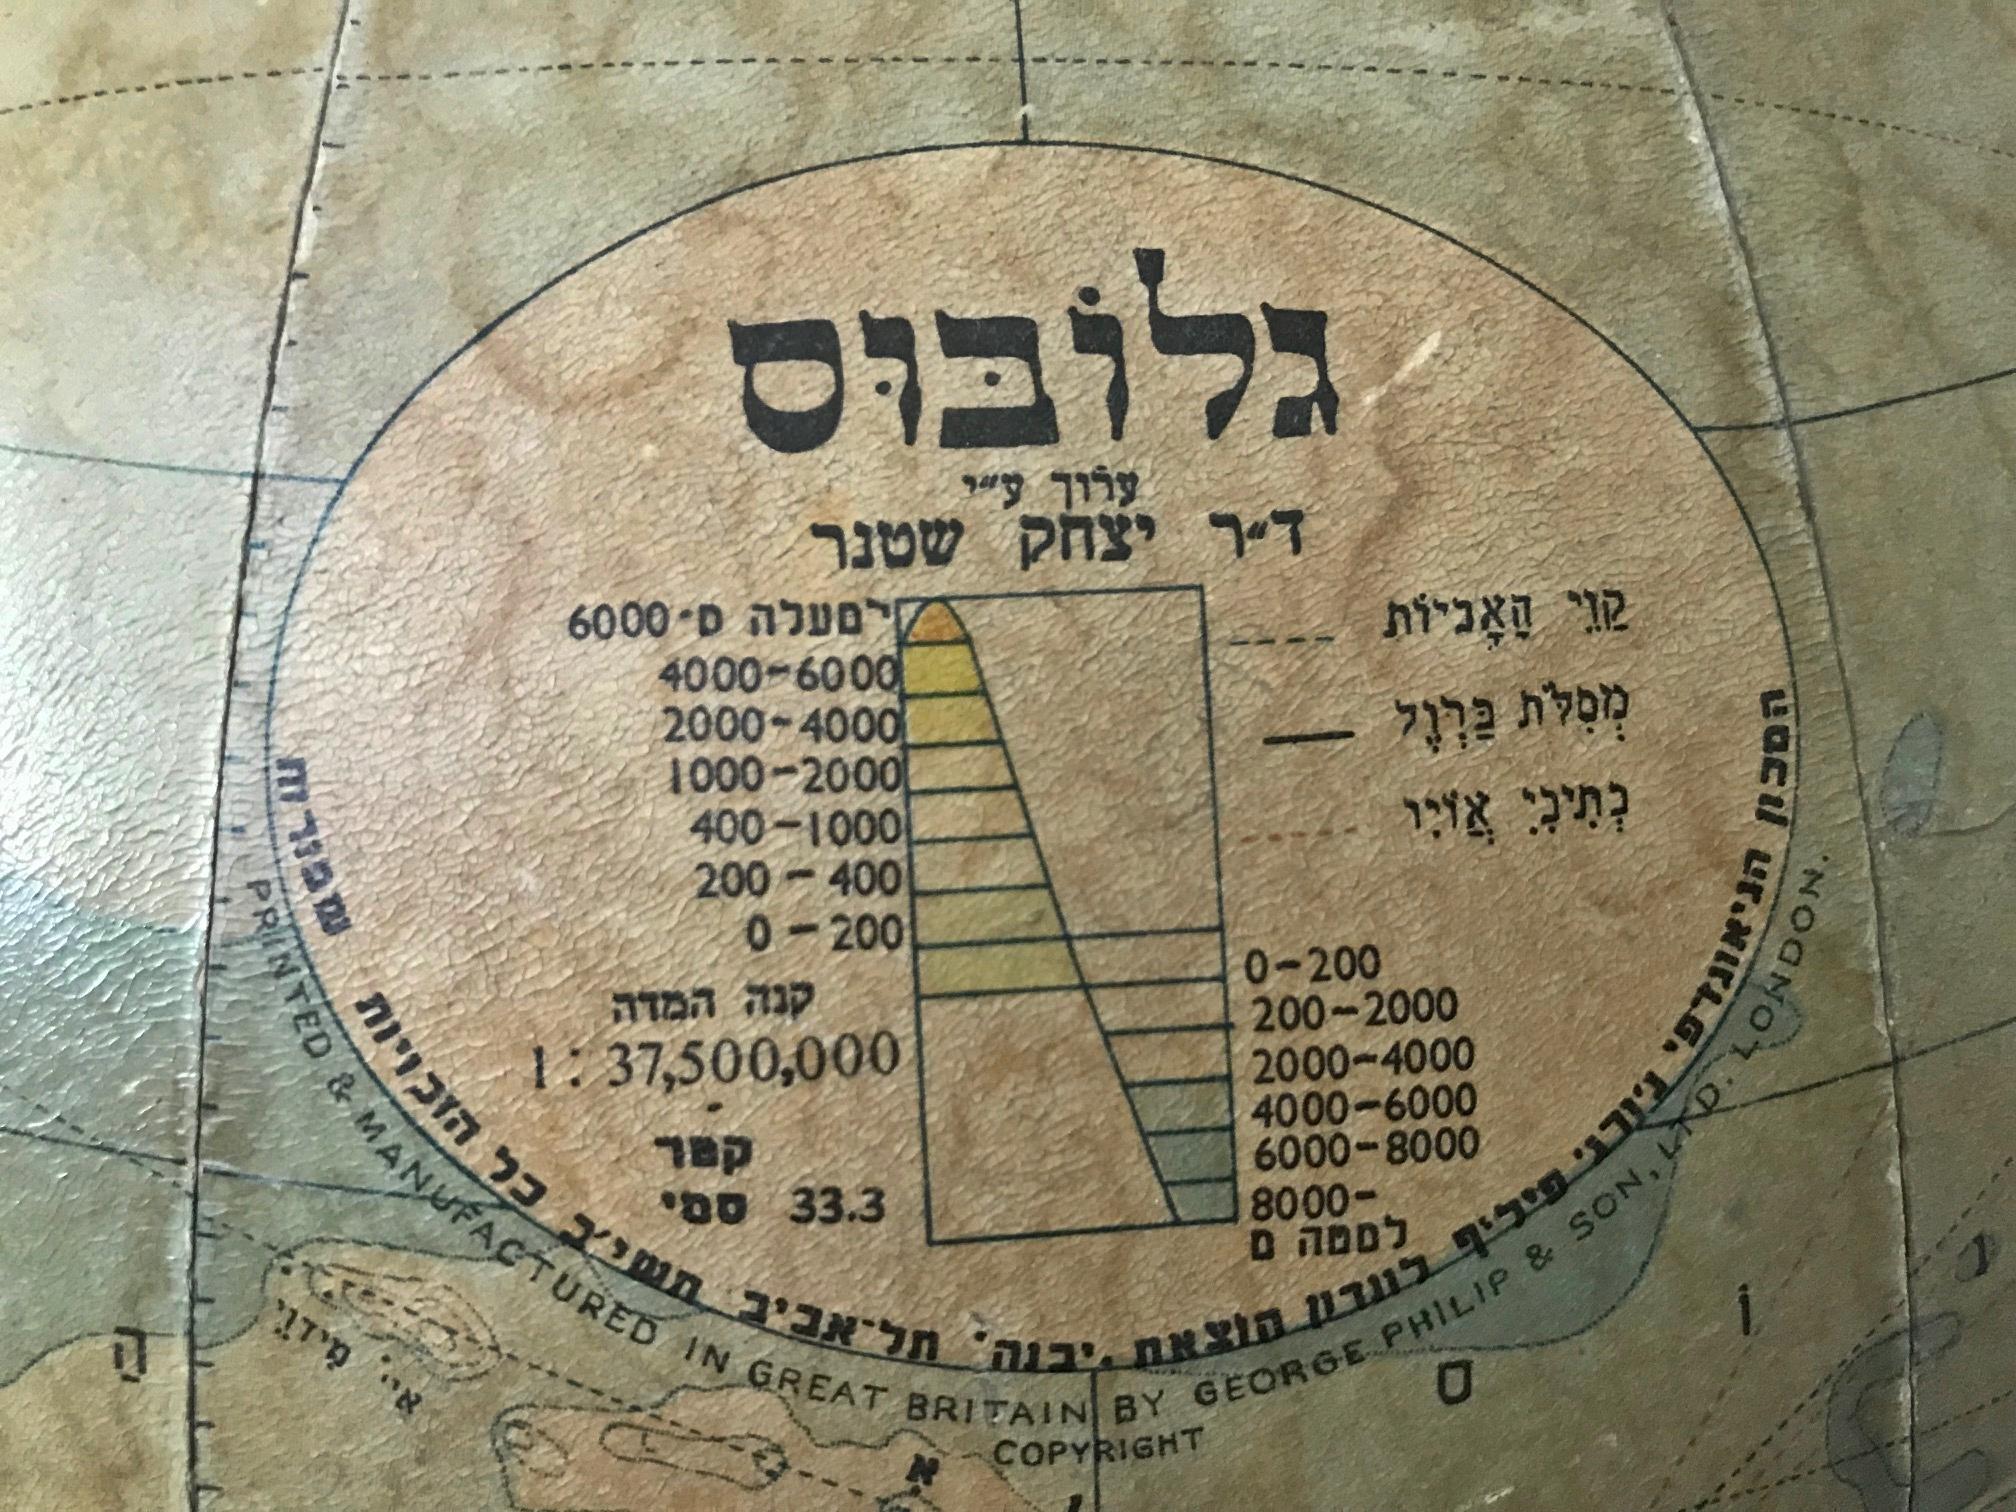 Rare Philip & Son globe in Hebrew, circa mid-1950s.

Globe
edited by Dr. Yitzhak Shatner
1 : 37,500,000
Printed & Manufatured in Great Britain by George Philip & Son, L.T.D. London, Copyright

In the course of our dealer life, we have found